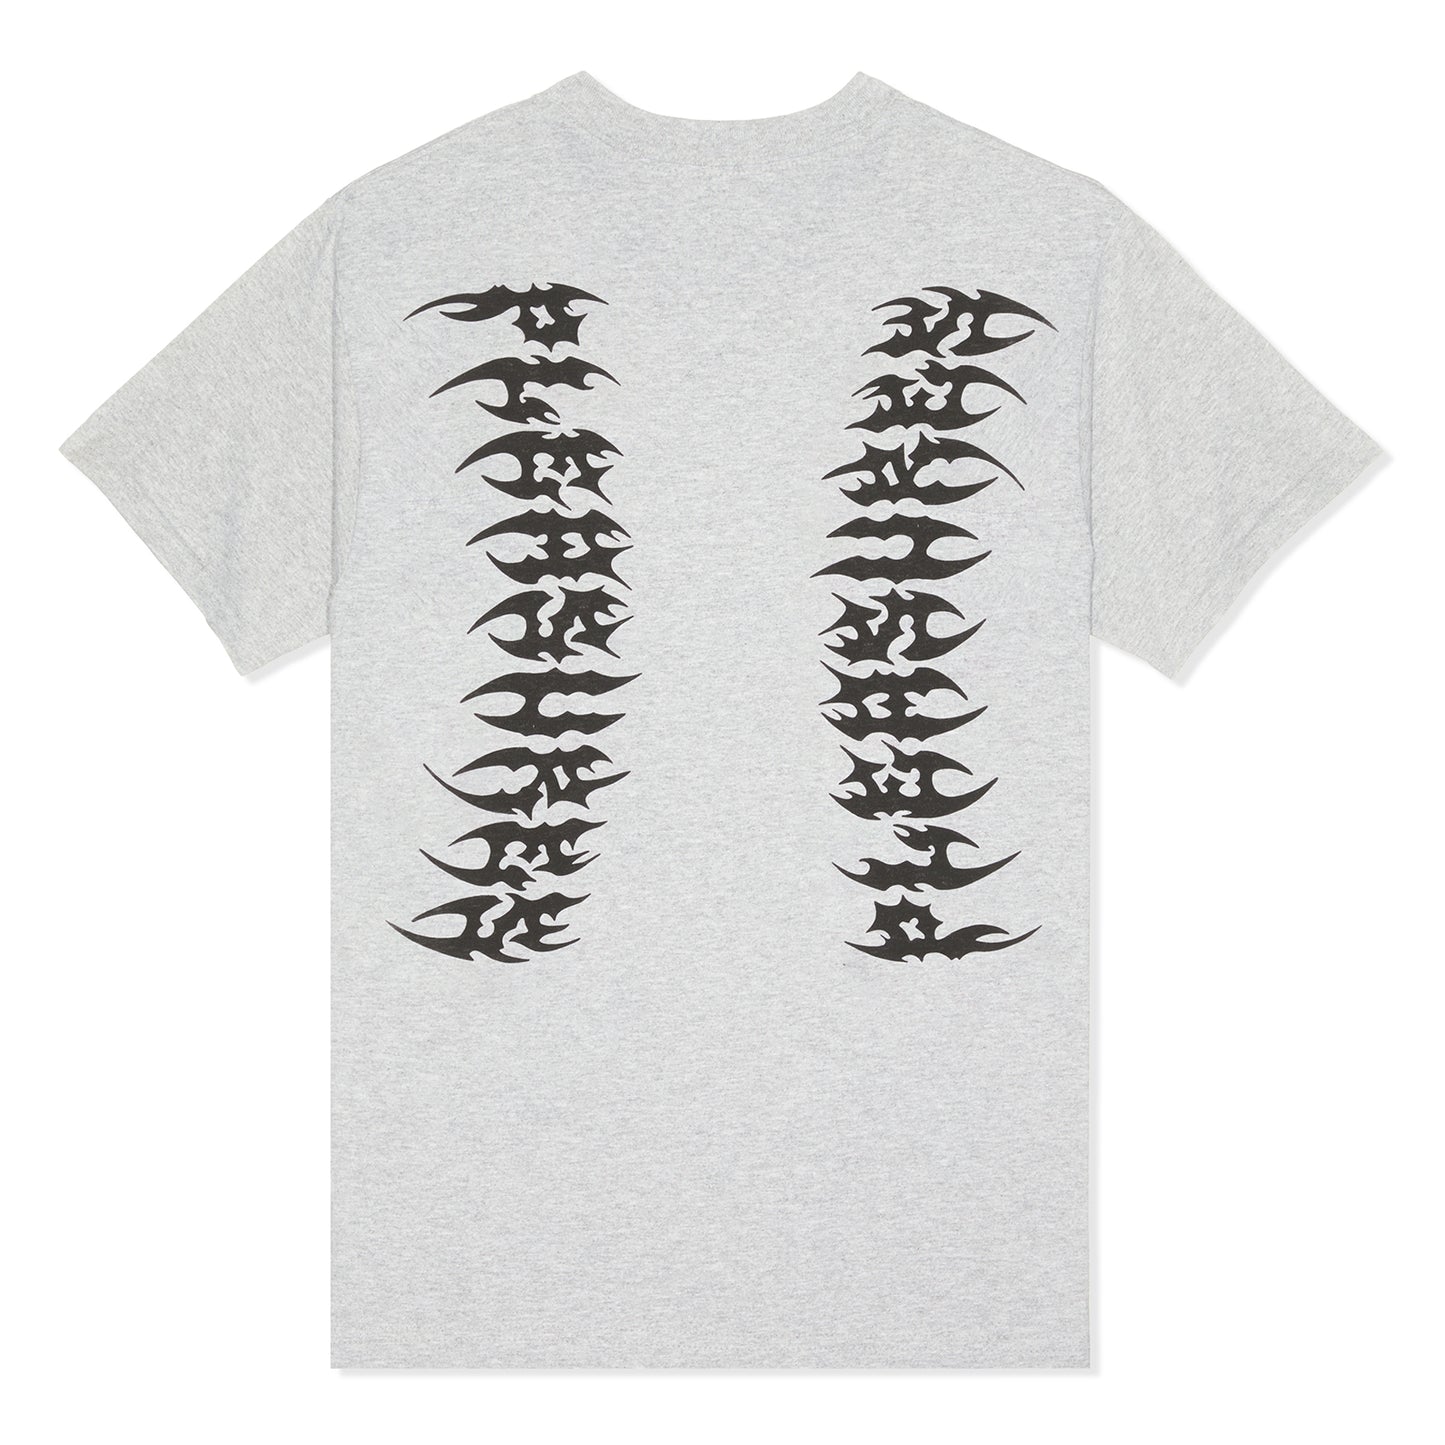 Pleasures Ripped T-Shirt (Heather Grey)